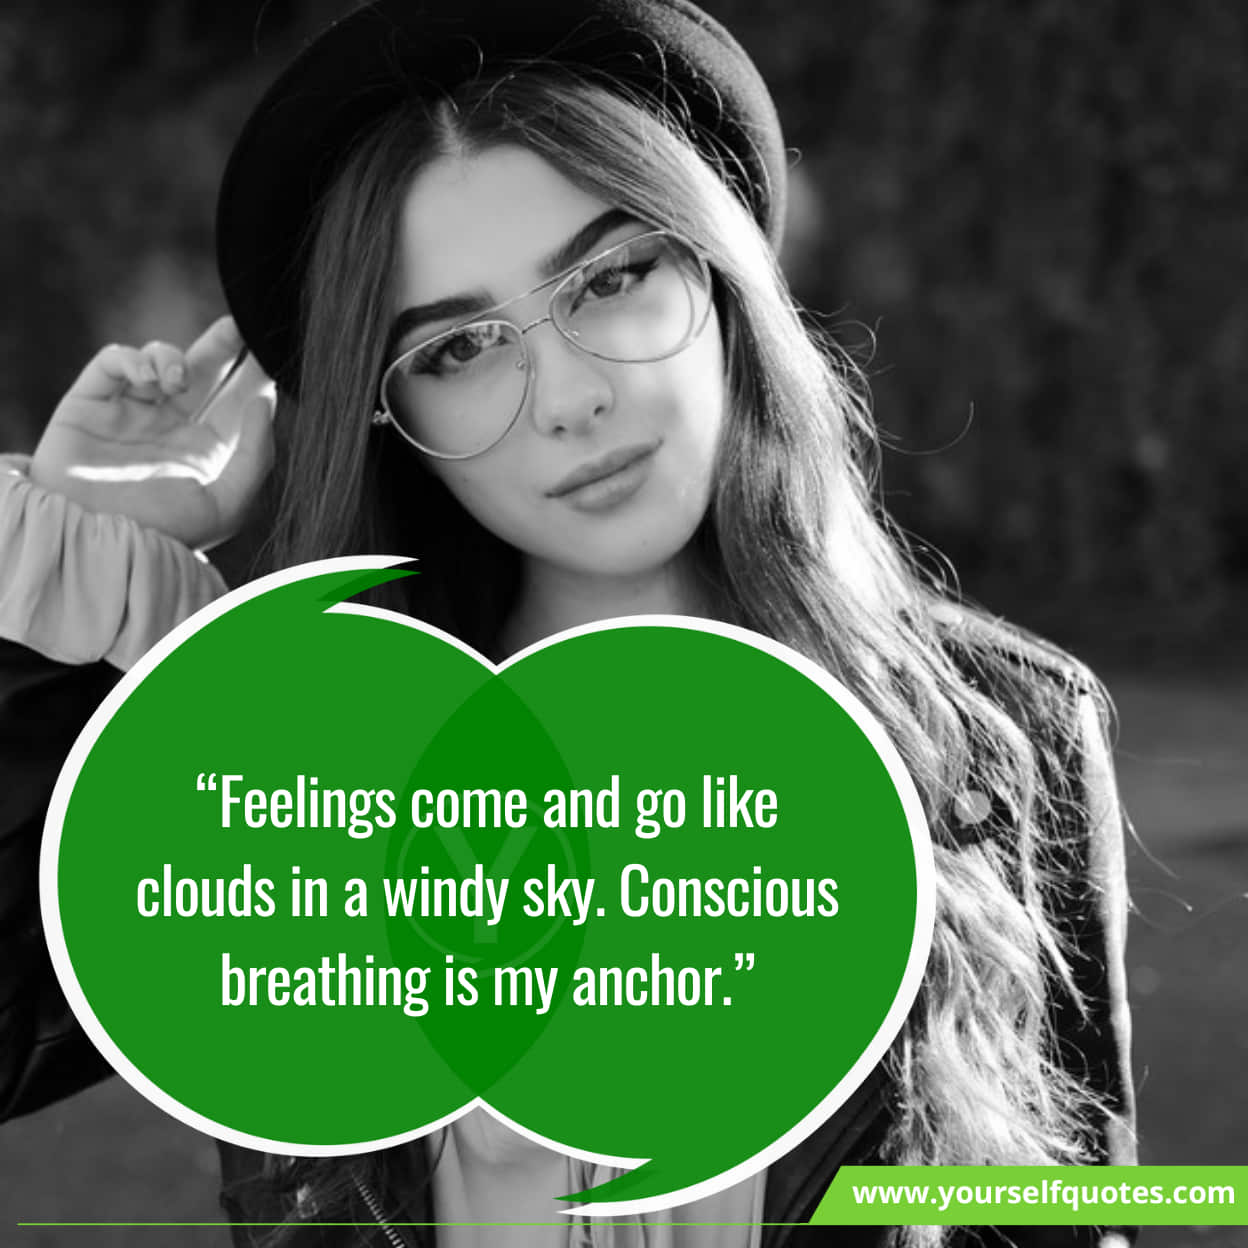 Best Quotes On Mental Health Quotes